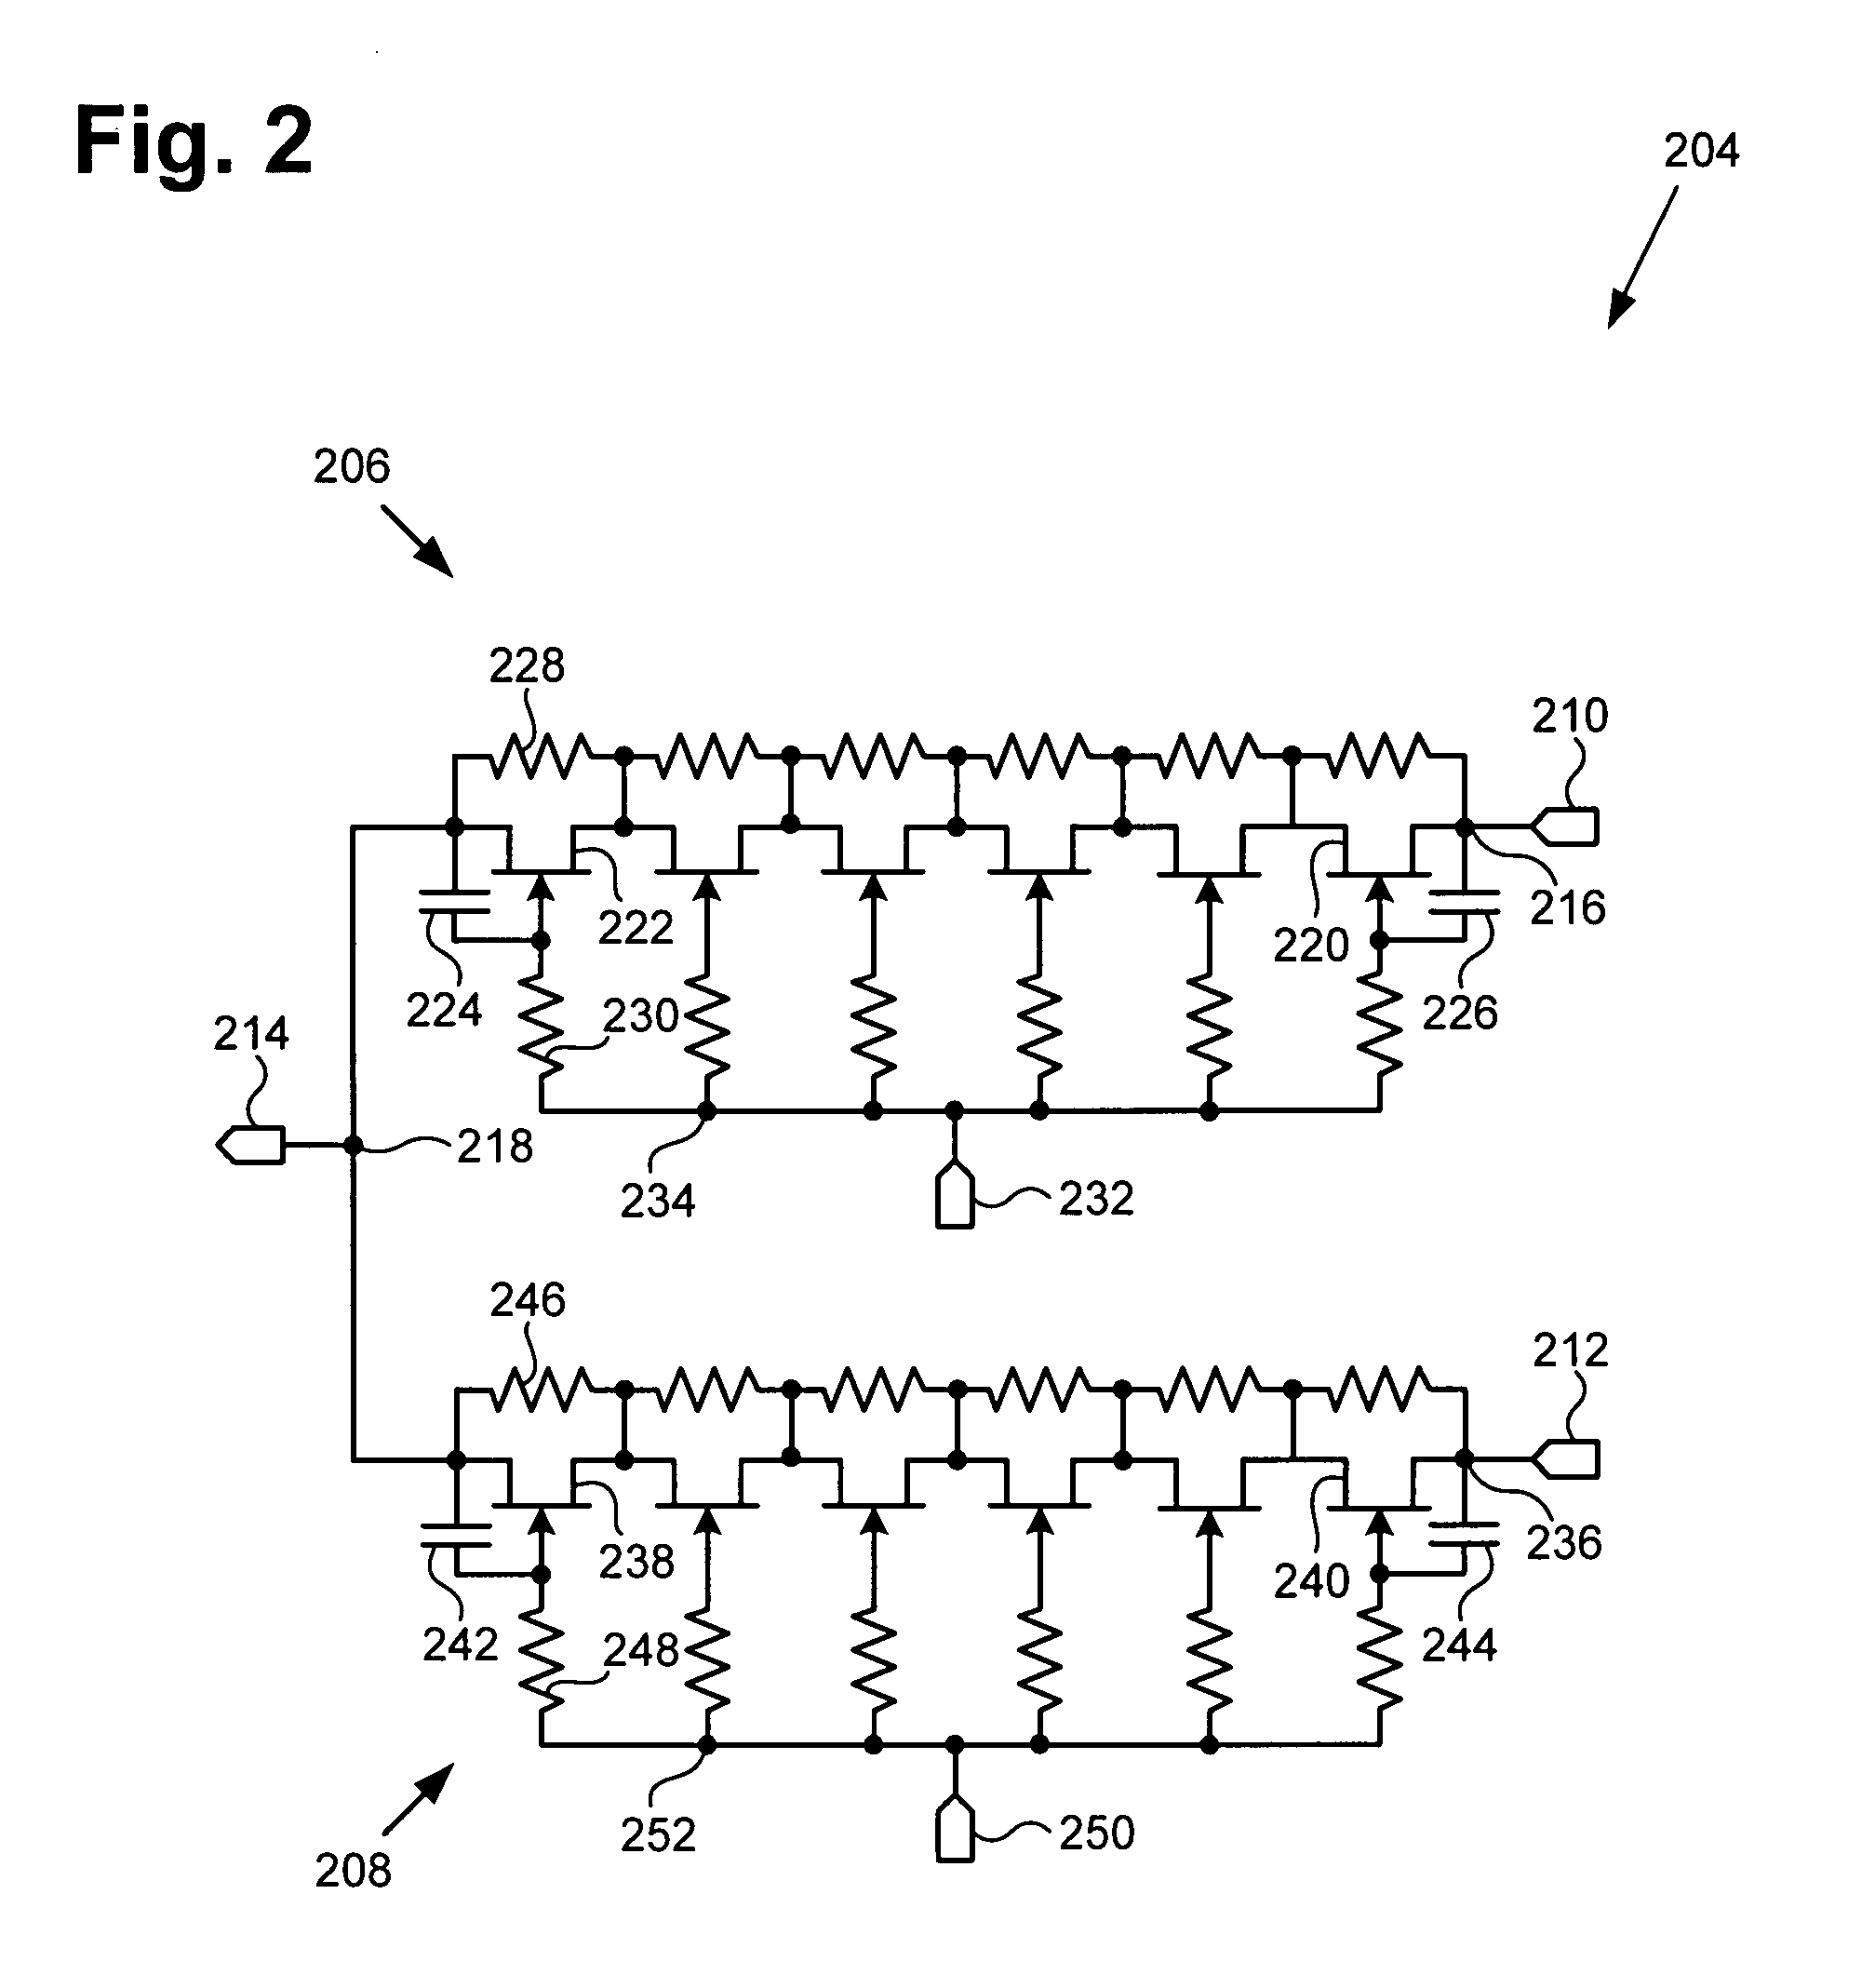 Switching module with harmonic phase tuning filter